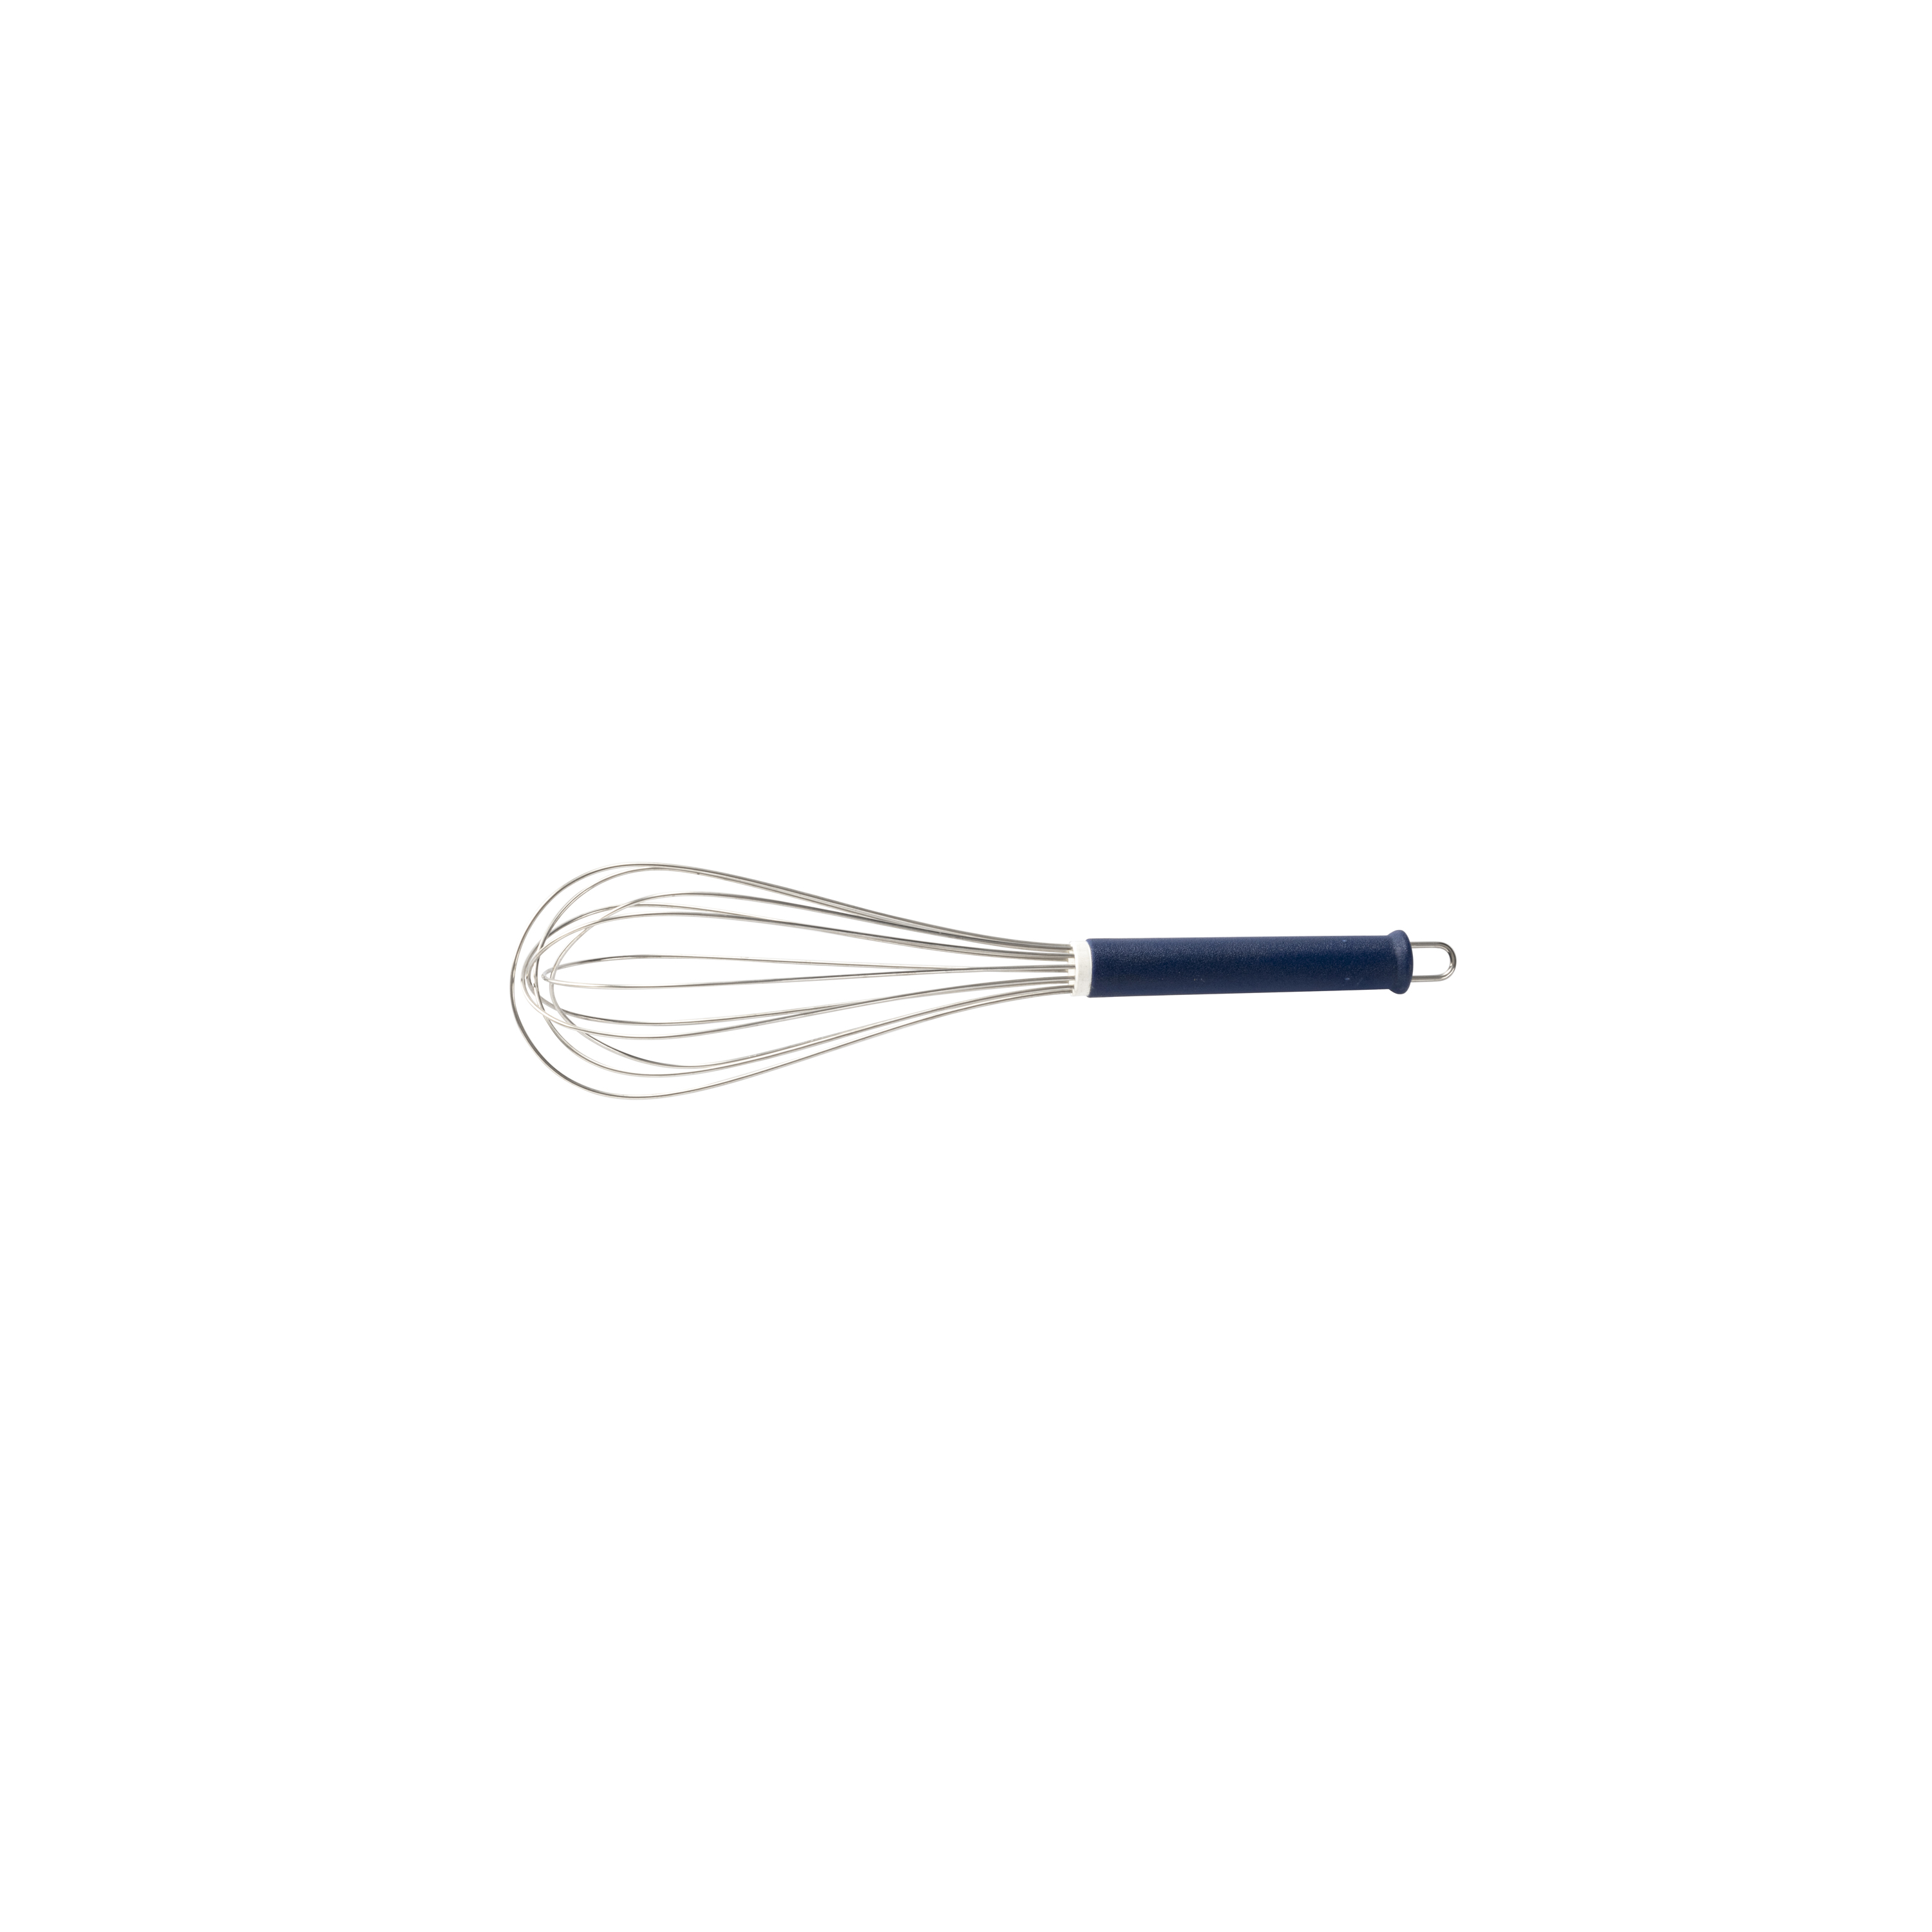 Blue stainless steel whisk - 16 wires